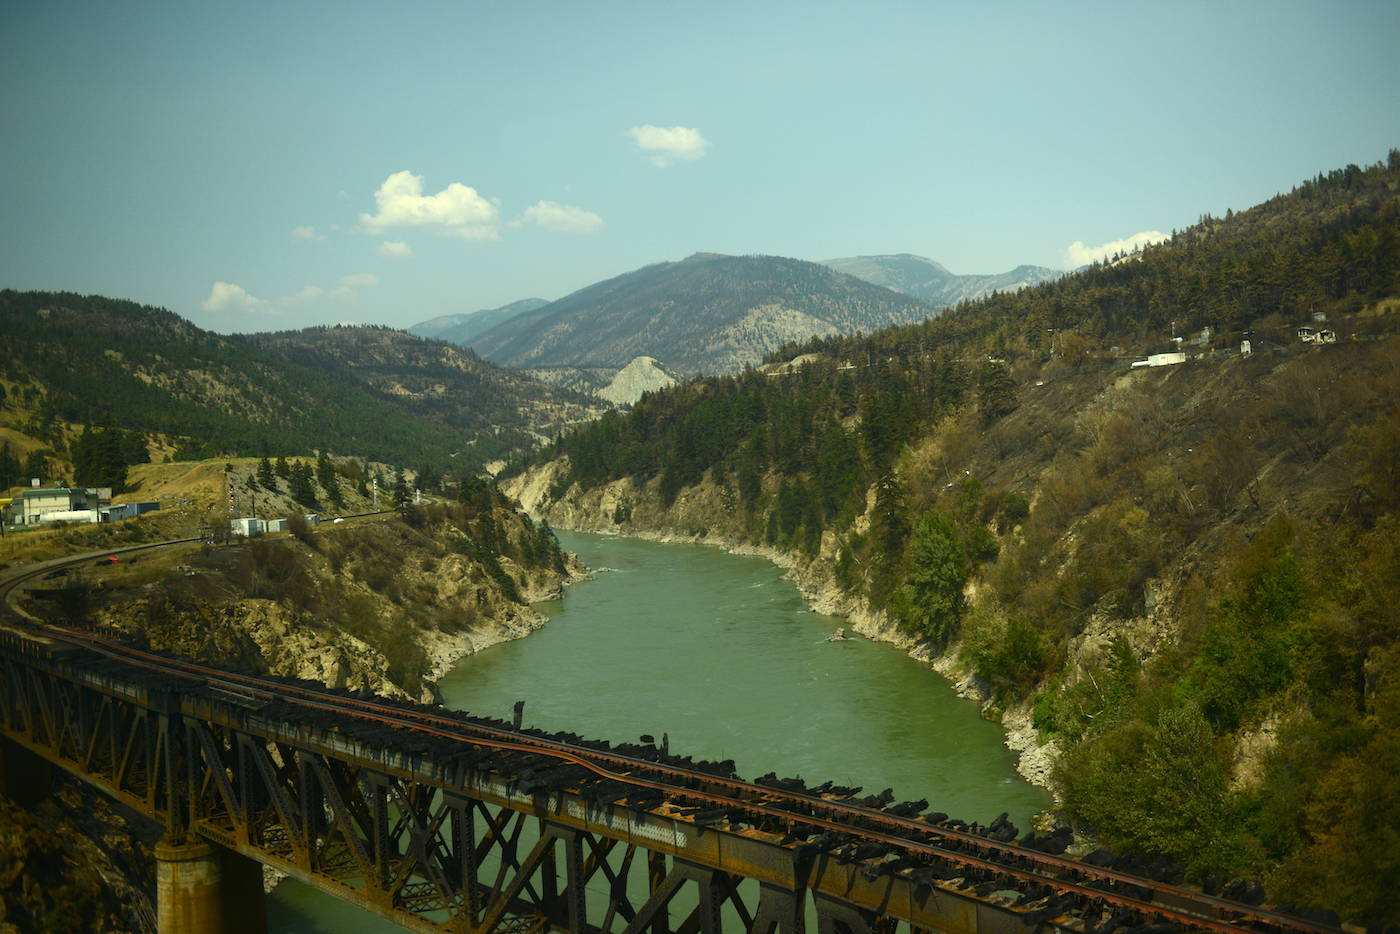 A railway bridge is seen burnt in Lytton, B.C. on Friday, July 9, 2021, nine days after a wildfire ripped through the village on June 30, 2021. (Jenna Hauck/ Black Press Media)